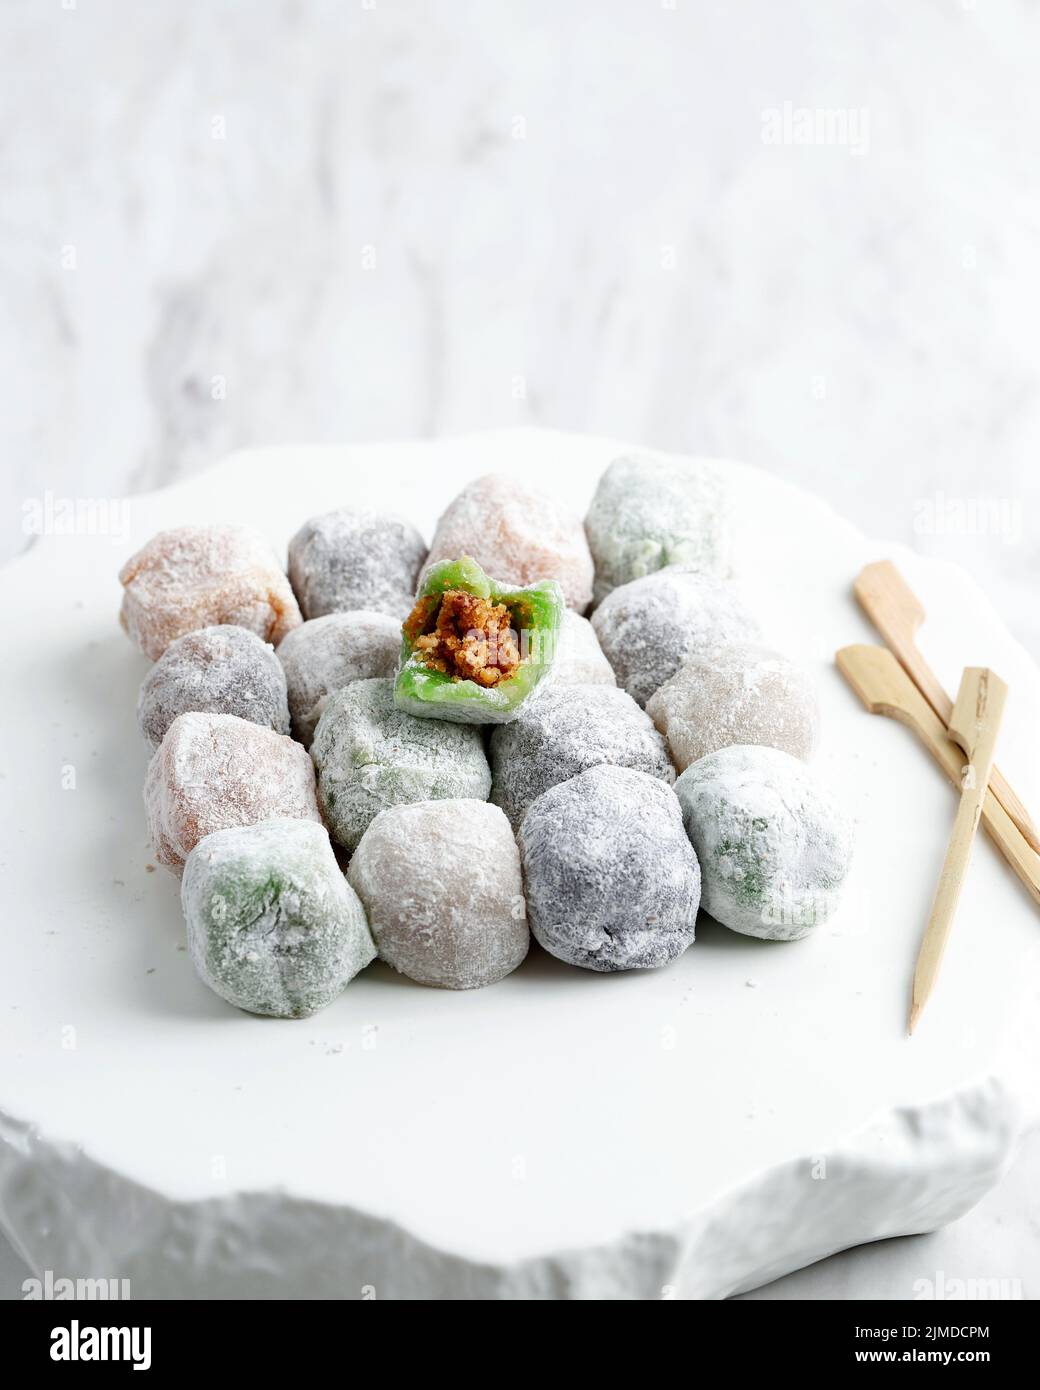 Mochi Sukabumi, Rice Cake Made from Sticky Rice Stuffed with Sweet Chunky Peanut. Typically Snack from Sukabumi, West Java, Indonesia Stock Photo